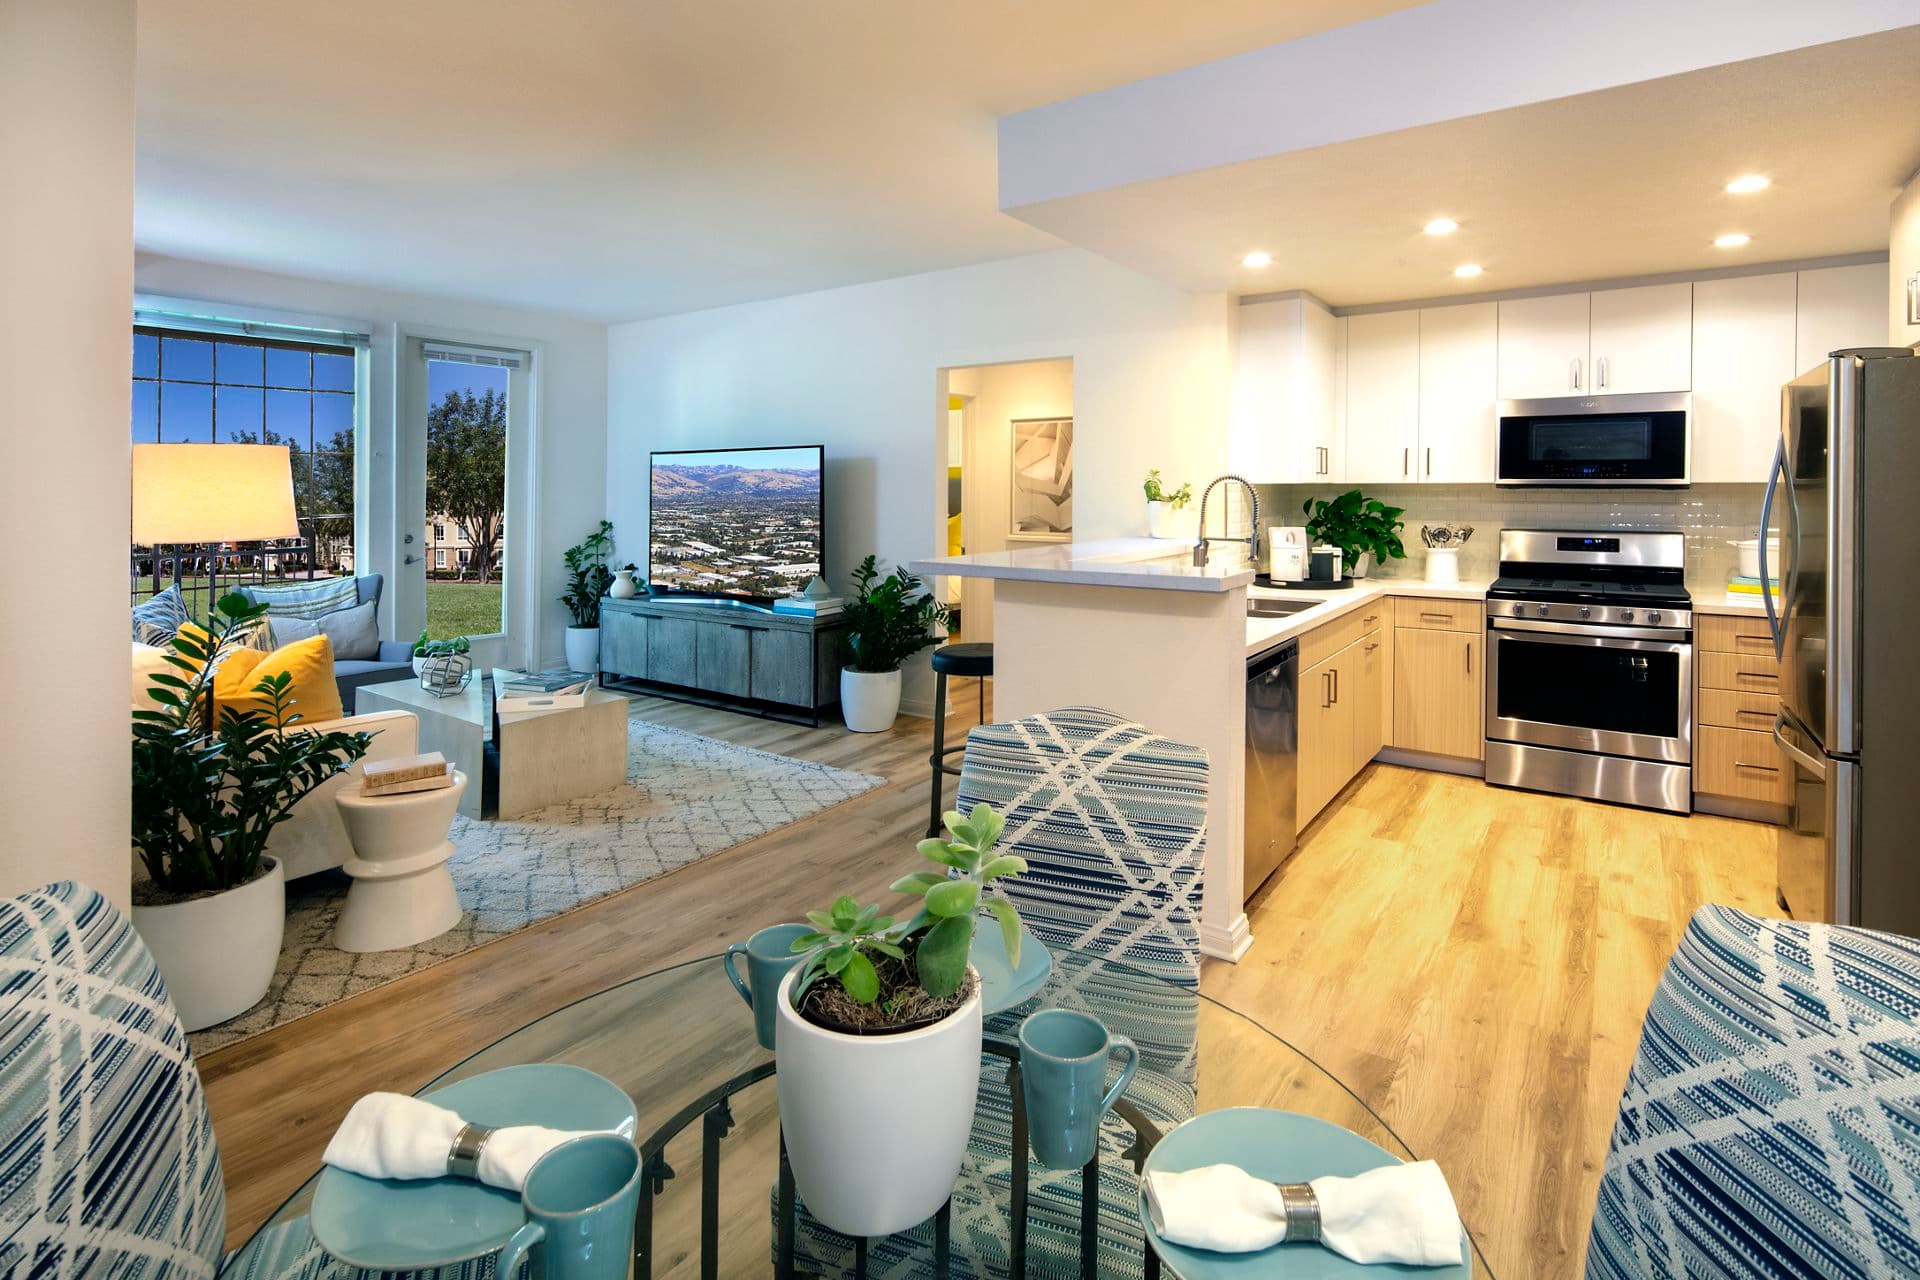 Interior view of a living room and kitchen at The Pines at North Park Apartment Homes in San Jose, CA.